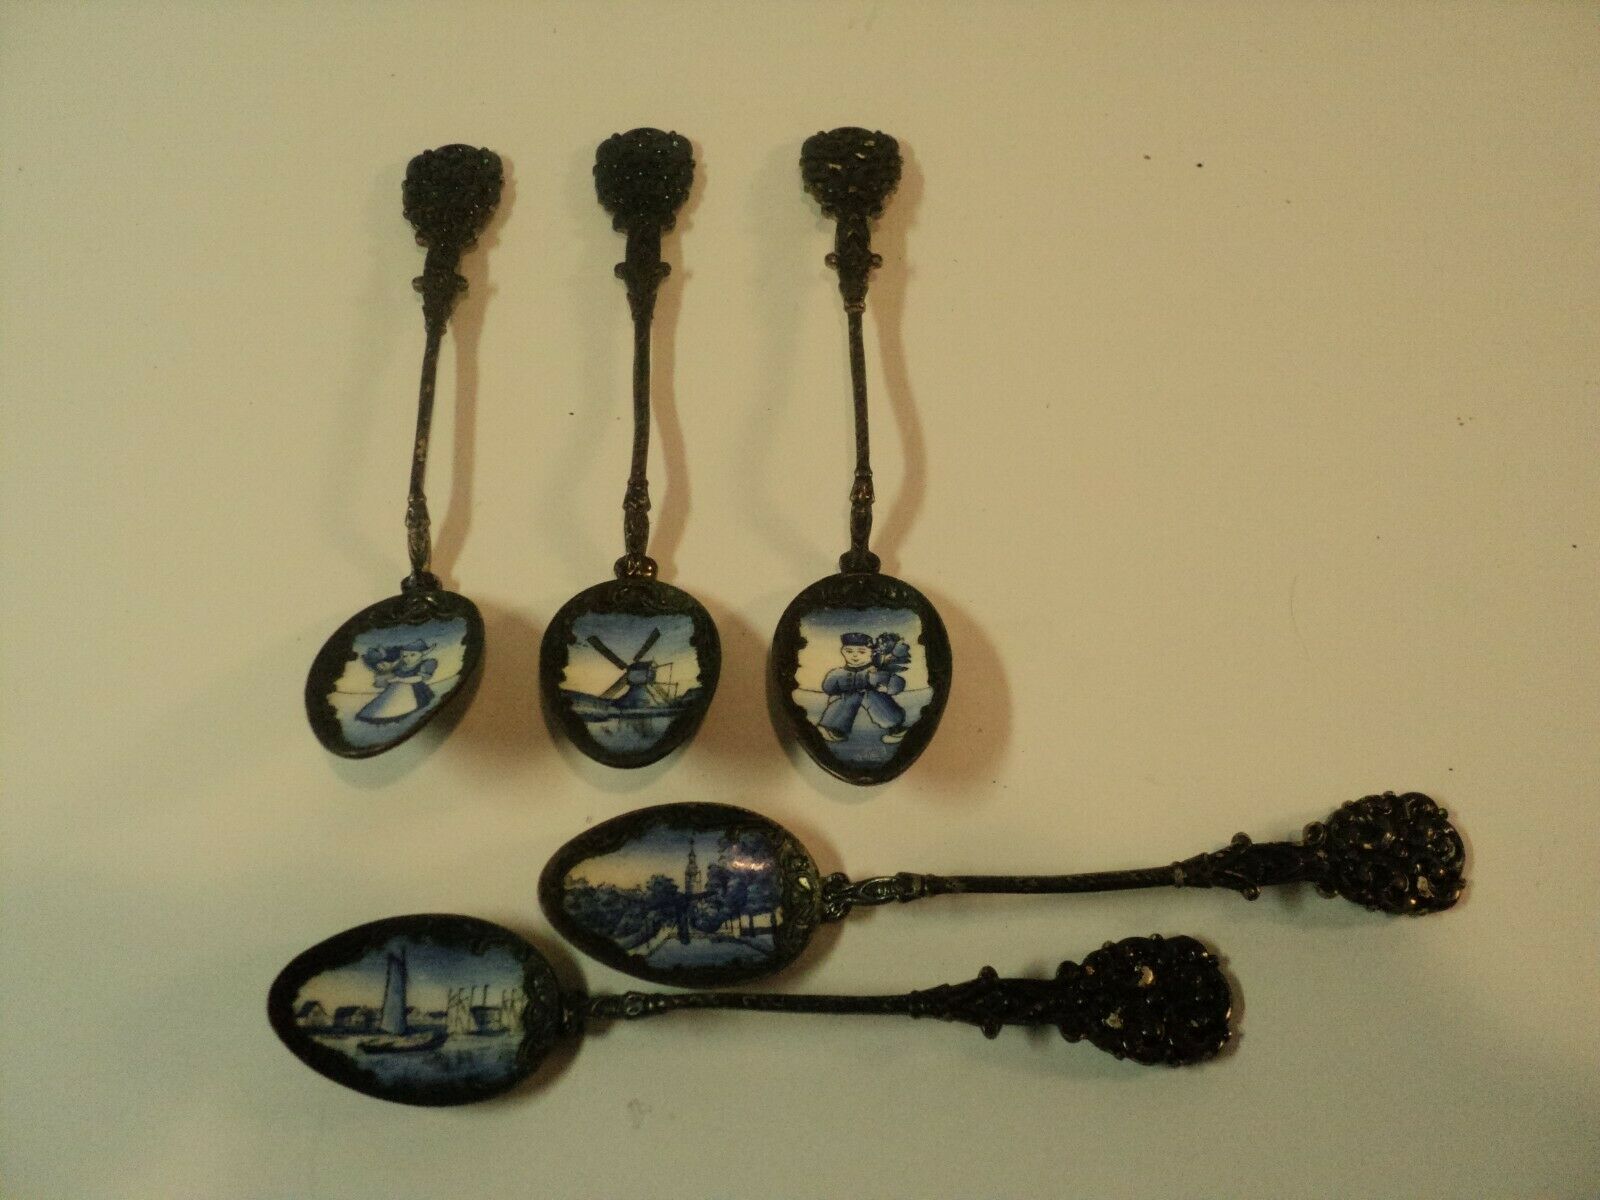 Set of 5 Souvenir Spoons, Delft Style Spoons, Made in Czechoslovakia